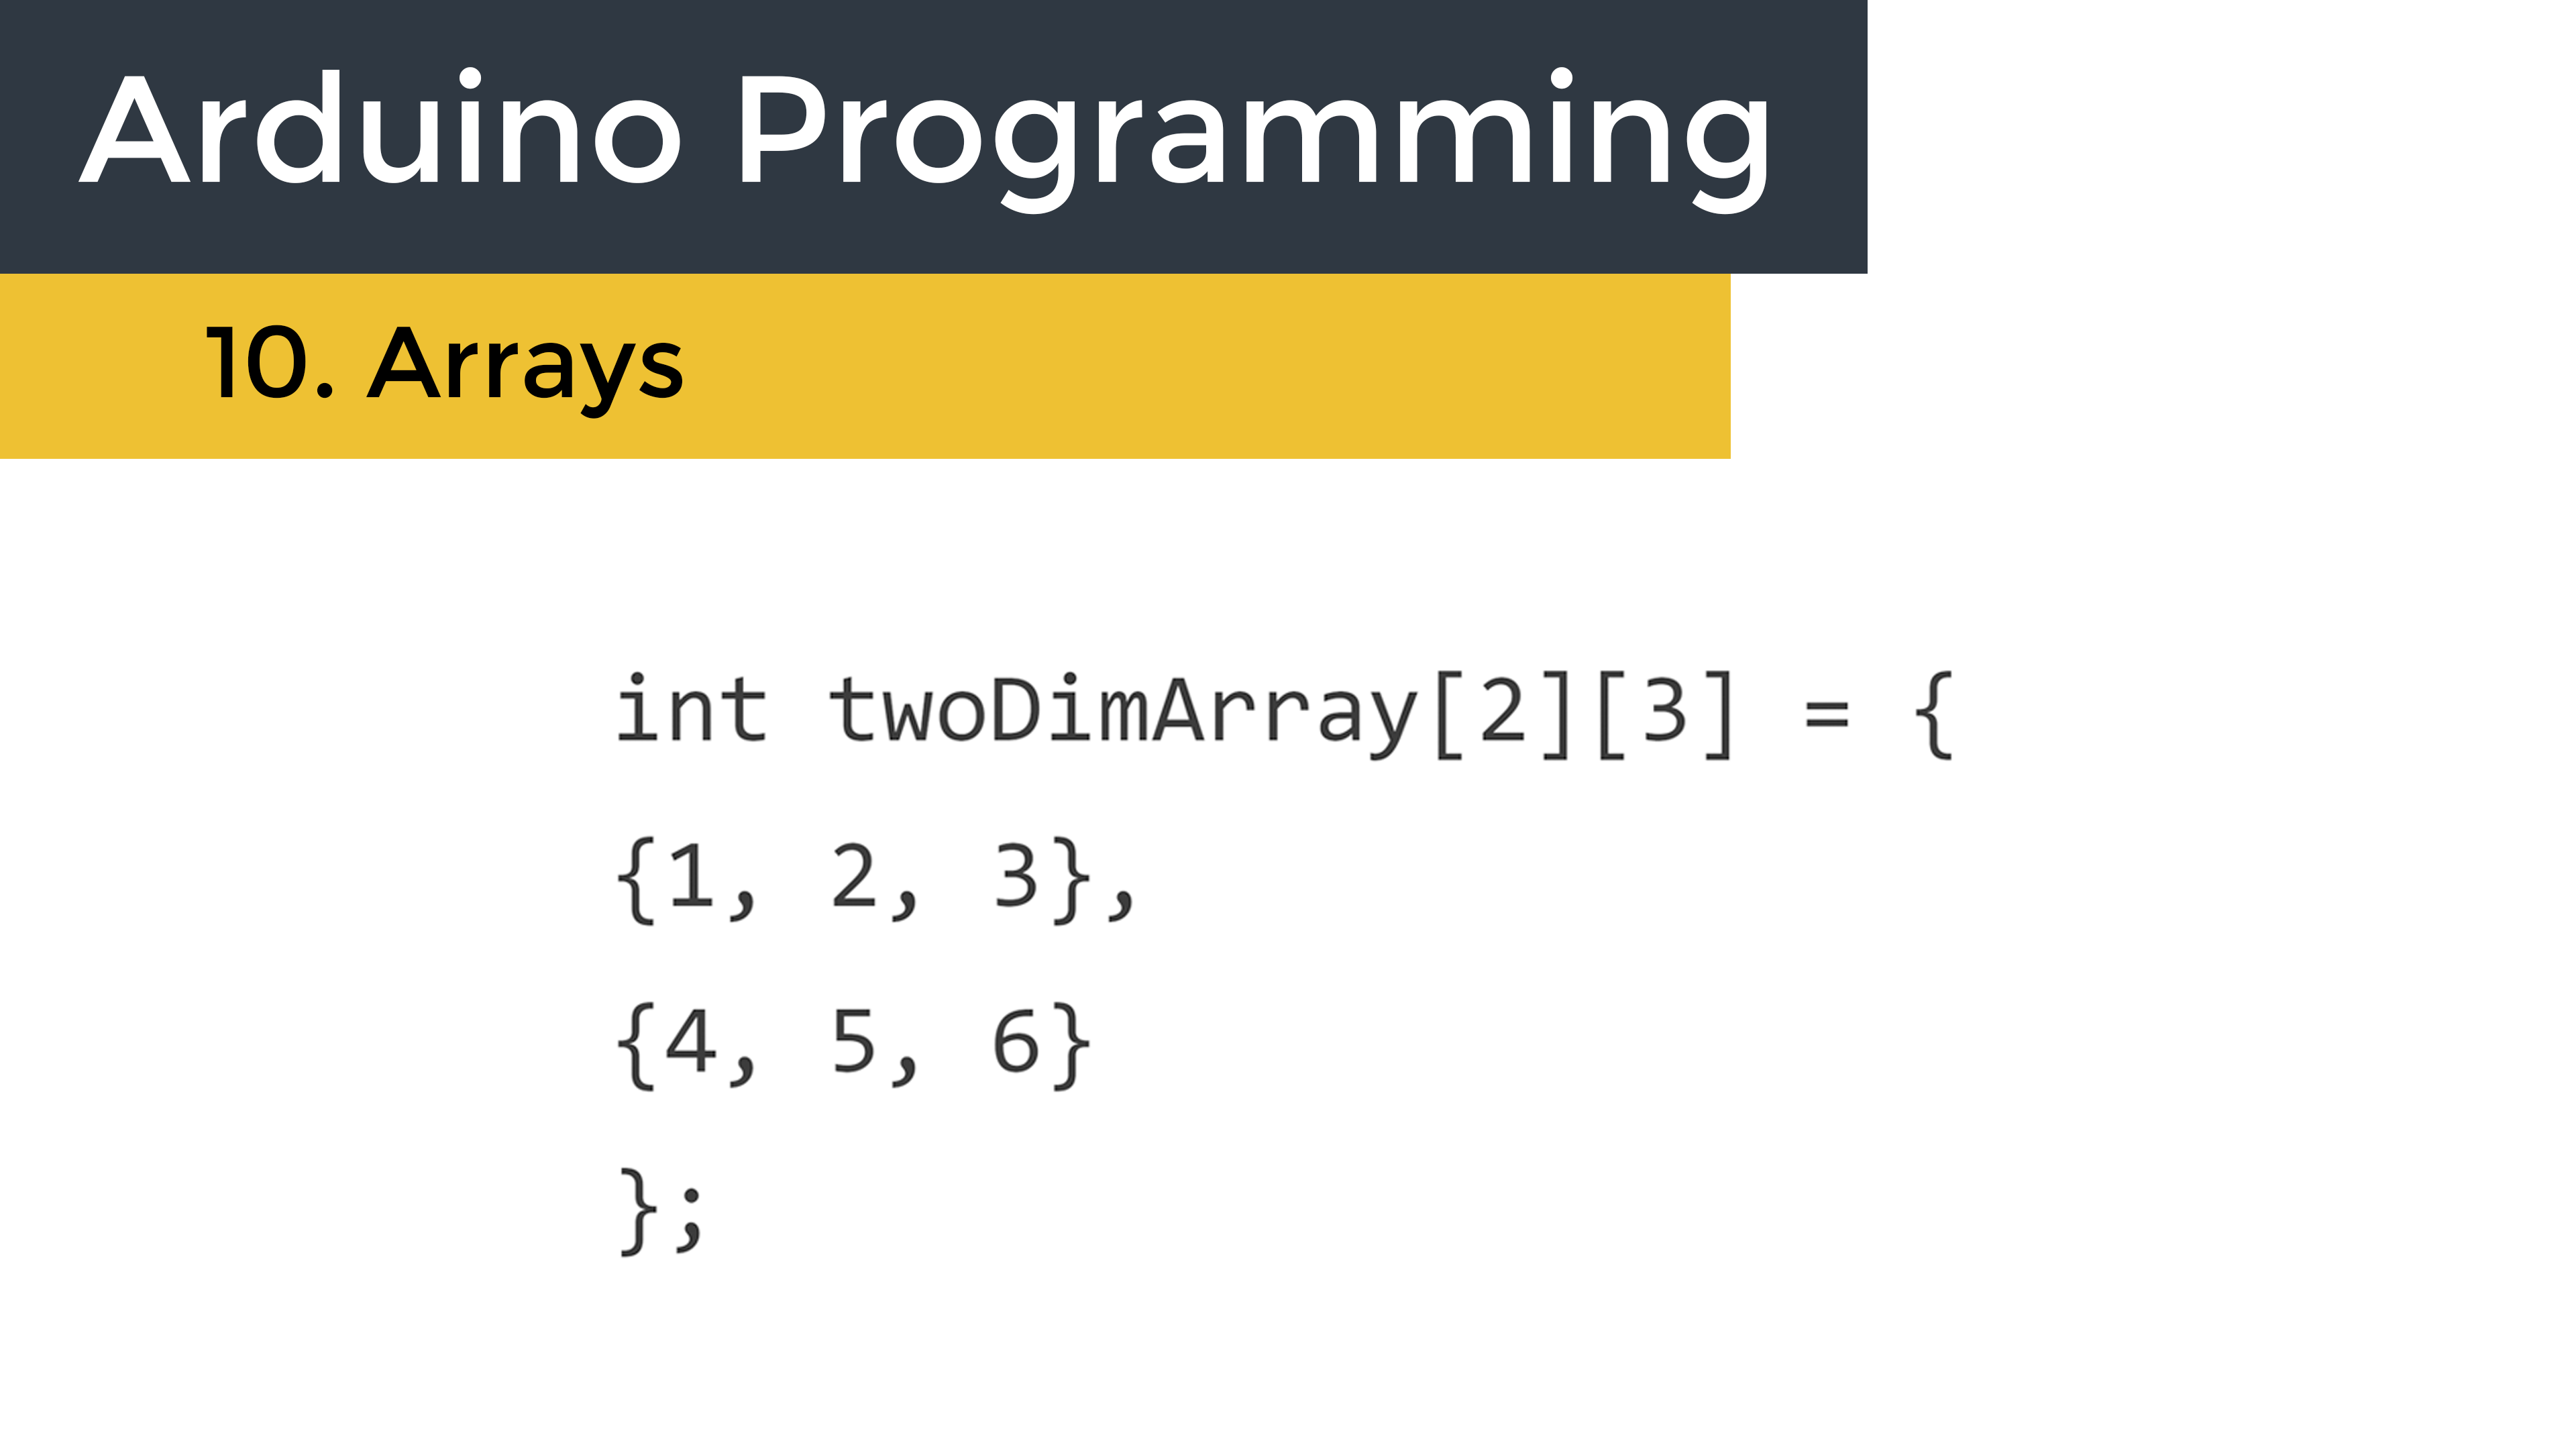 How to Use Arrays in Arduino Programming